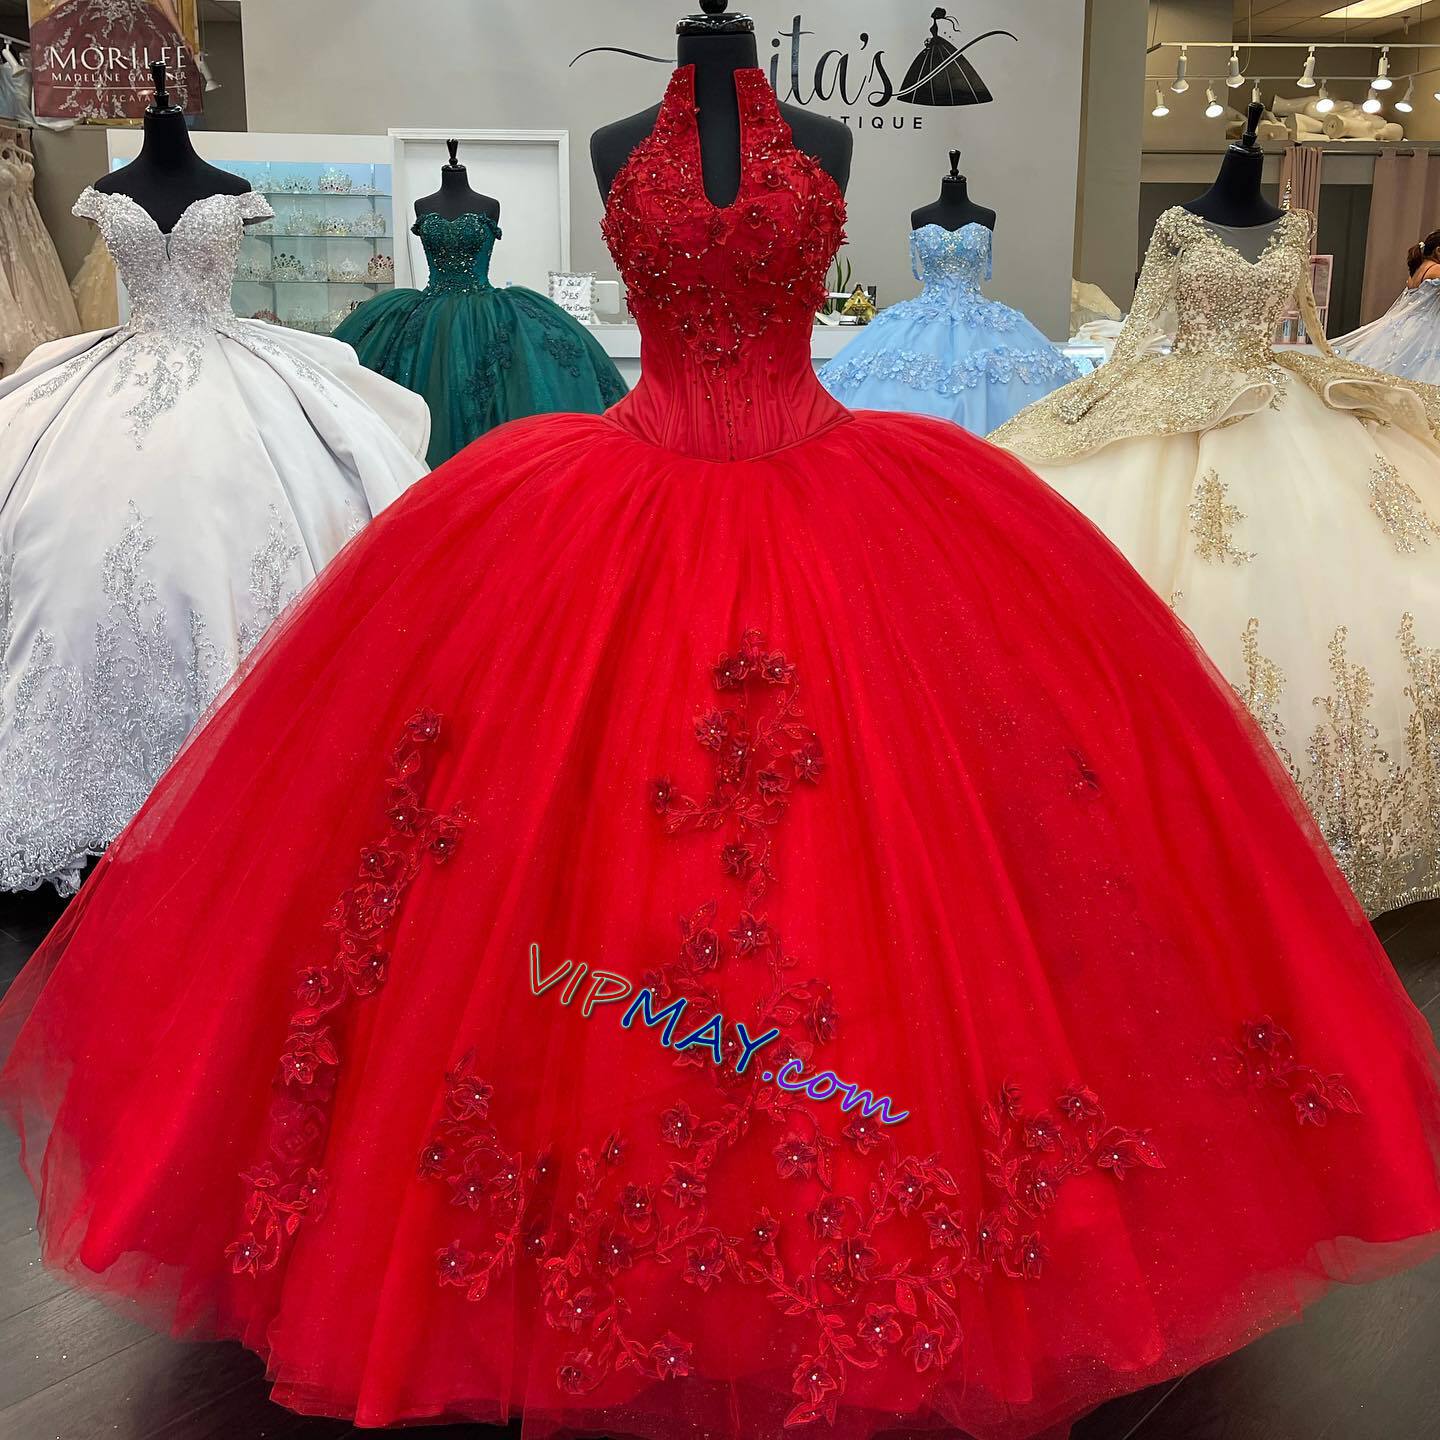 new quince dress,bright red quinceanera dress,red quinceanera dress,halter neckline quinceanera dress,halter top quinceanera dress,ball gowns with trains quinceanera dress,mermaid dress with train,elegant quinceanera dress wholesale,chinese quinceanera dress factory,